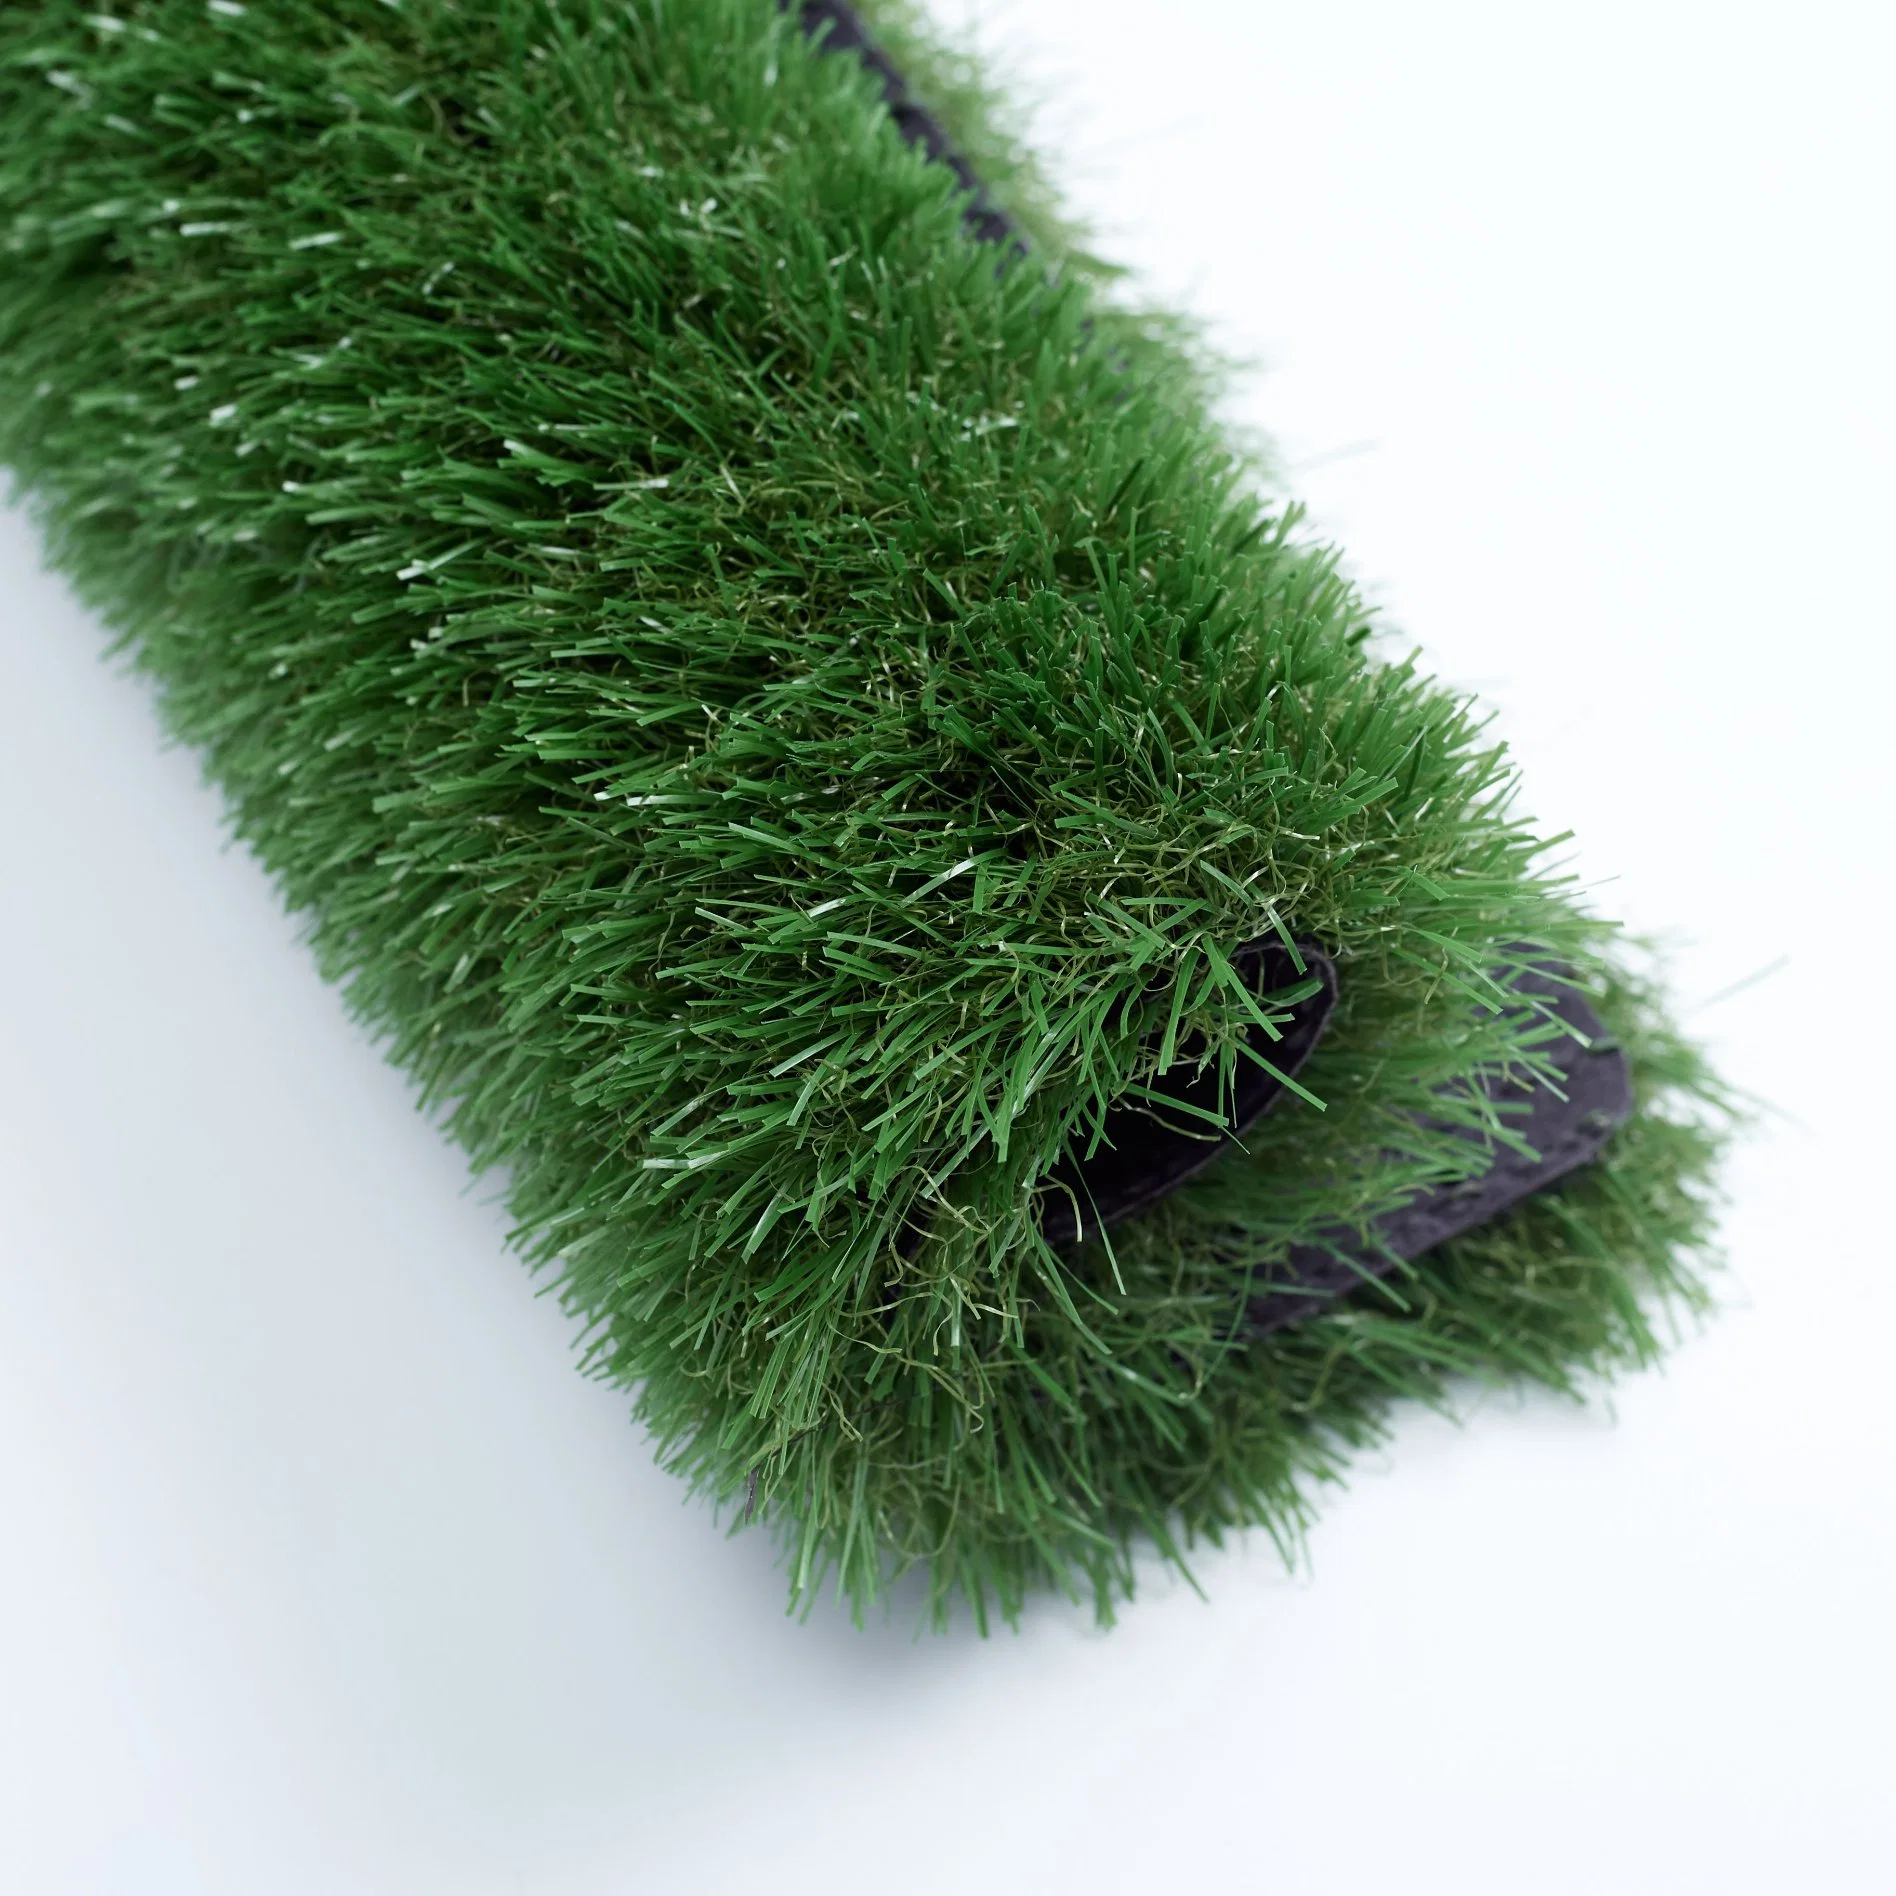 50mm Artificial Grass Synthetic Lawn for Football Field Sports Court Soccer Grass Football Turf Football Artificial Turf Grass